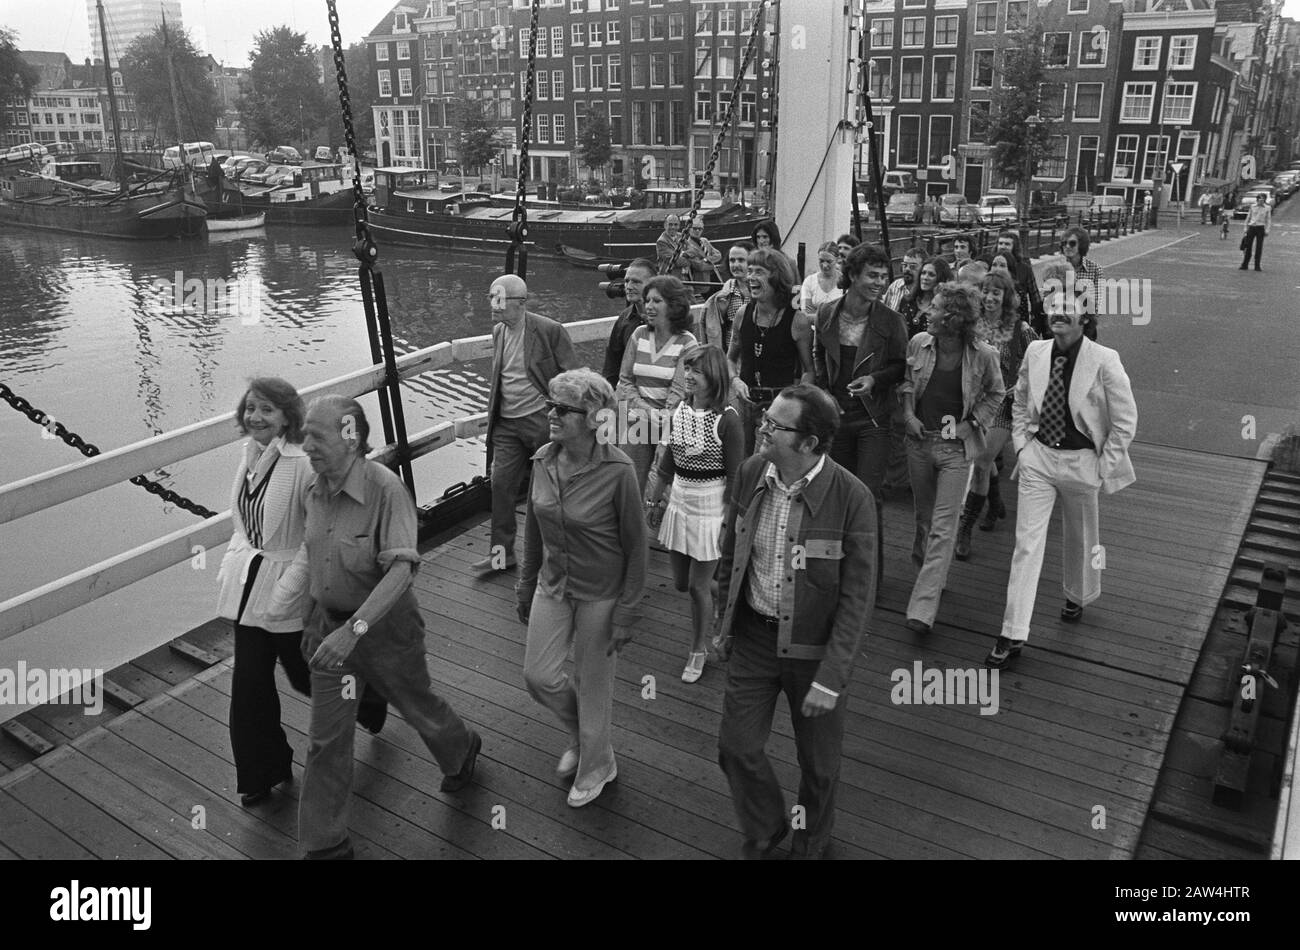 Rehearsals for what a planet, Annie M. G. Schmidt started walking all collaborators to musical about Skinny Annotation: First Joan Remmelts and Conny Stuart, behind Annie M. G. Schmidt, right from her Harry Bannink behind her Jennifer Willems left behind Ronny Bierman (with links behind her John Koch). Far right in white suit Willem Nijholt. The tall young man in the middle is Coen of Free Berghe the Coningh Date: August 20, 1973 Keywords: REHEARSALS, bridges, employees, musicals Person Name: Annie MG Schmidt Stock Photo